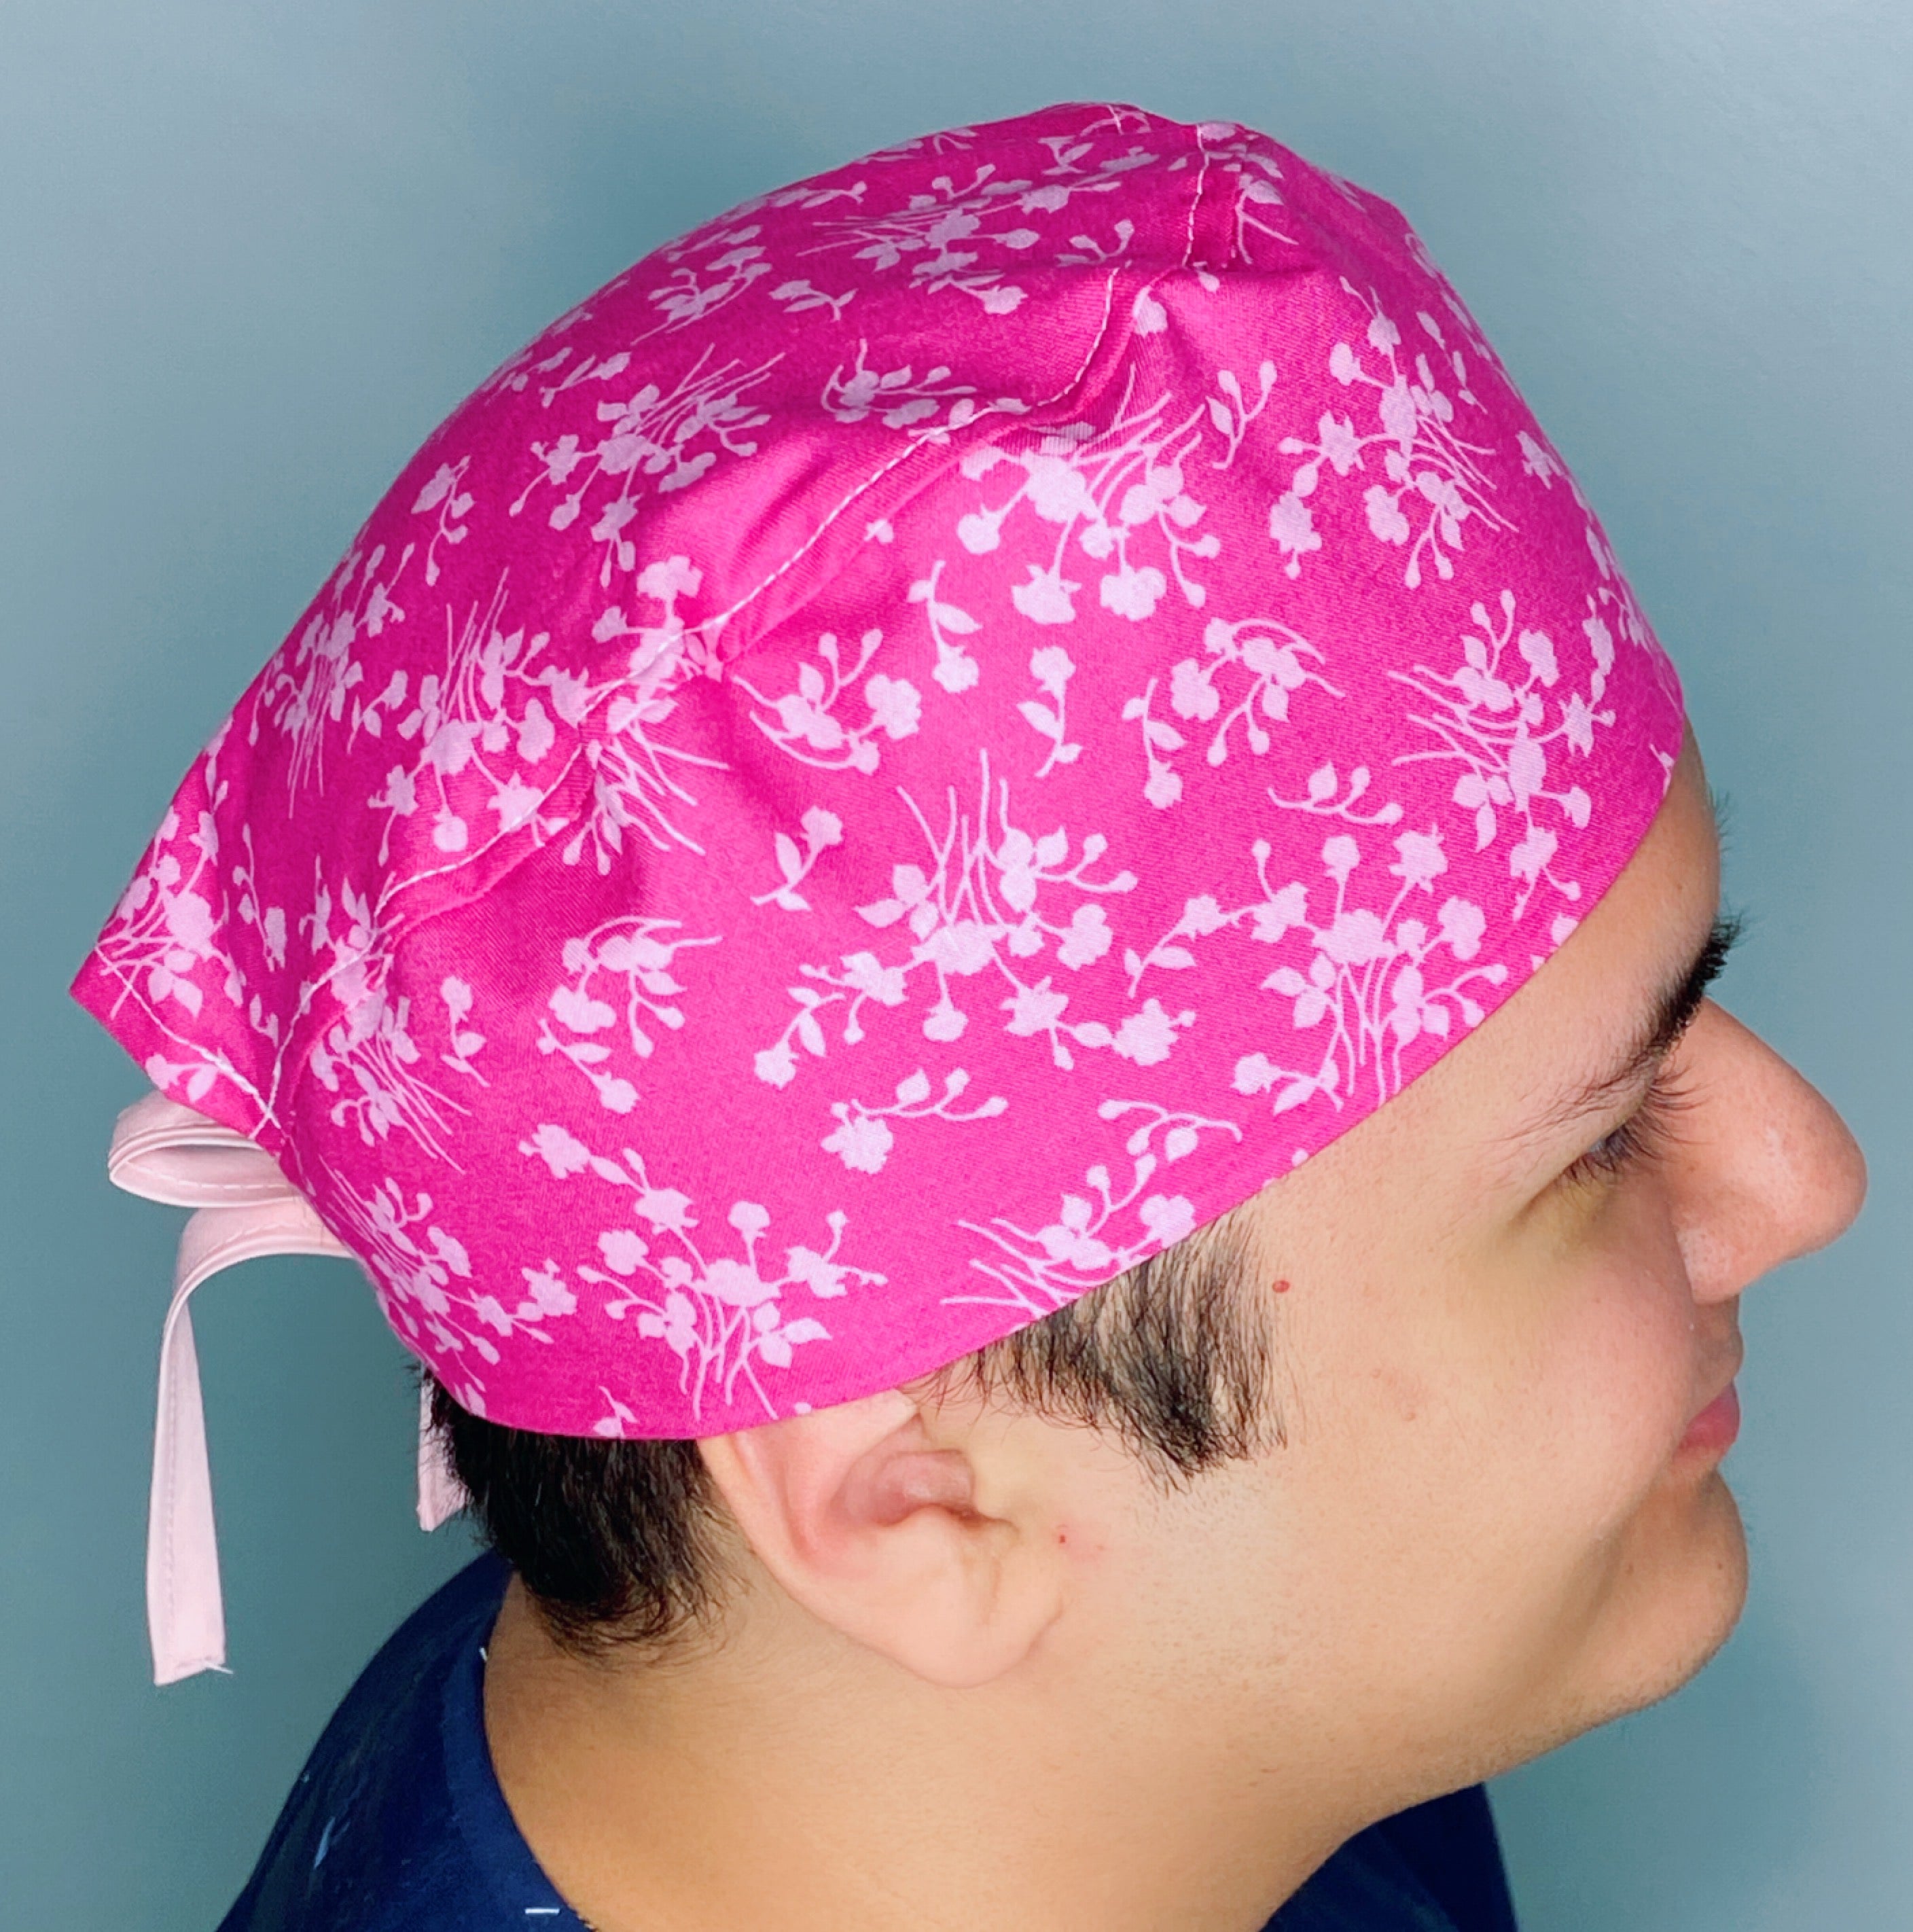 Small Delicate Flower Silhouettes on Pink Floral Design Unisex Cute Scrub Cap